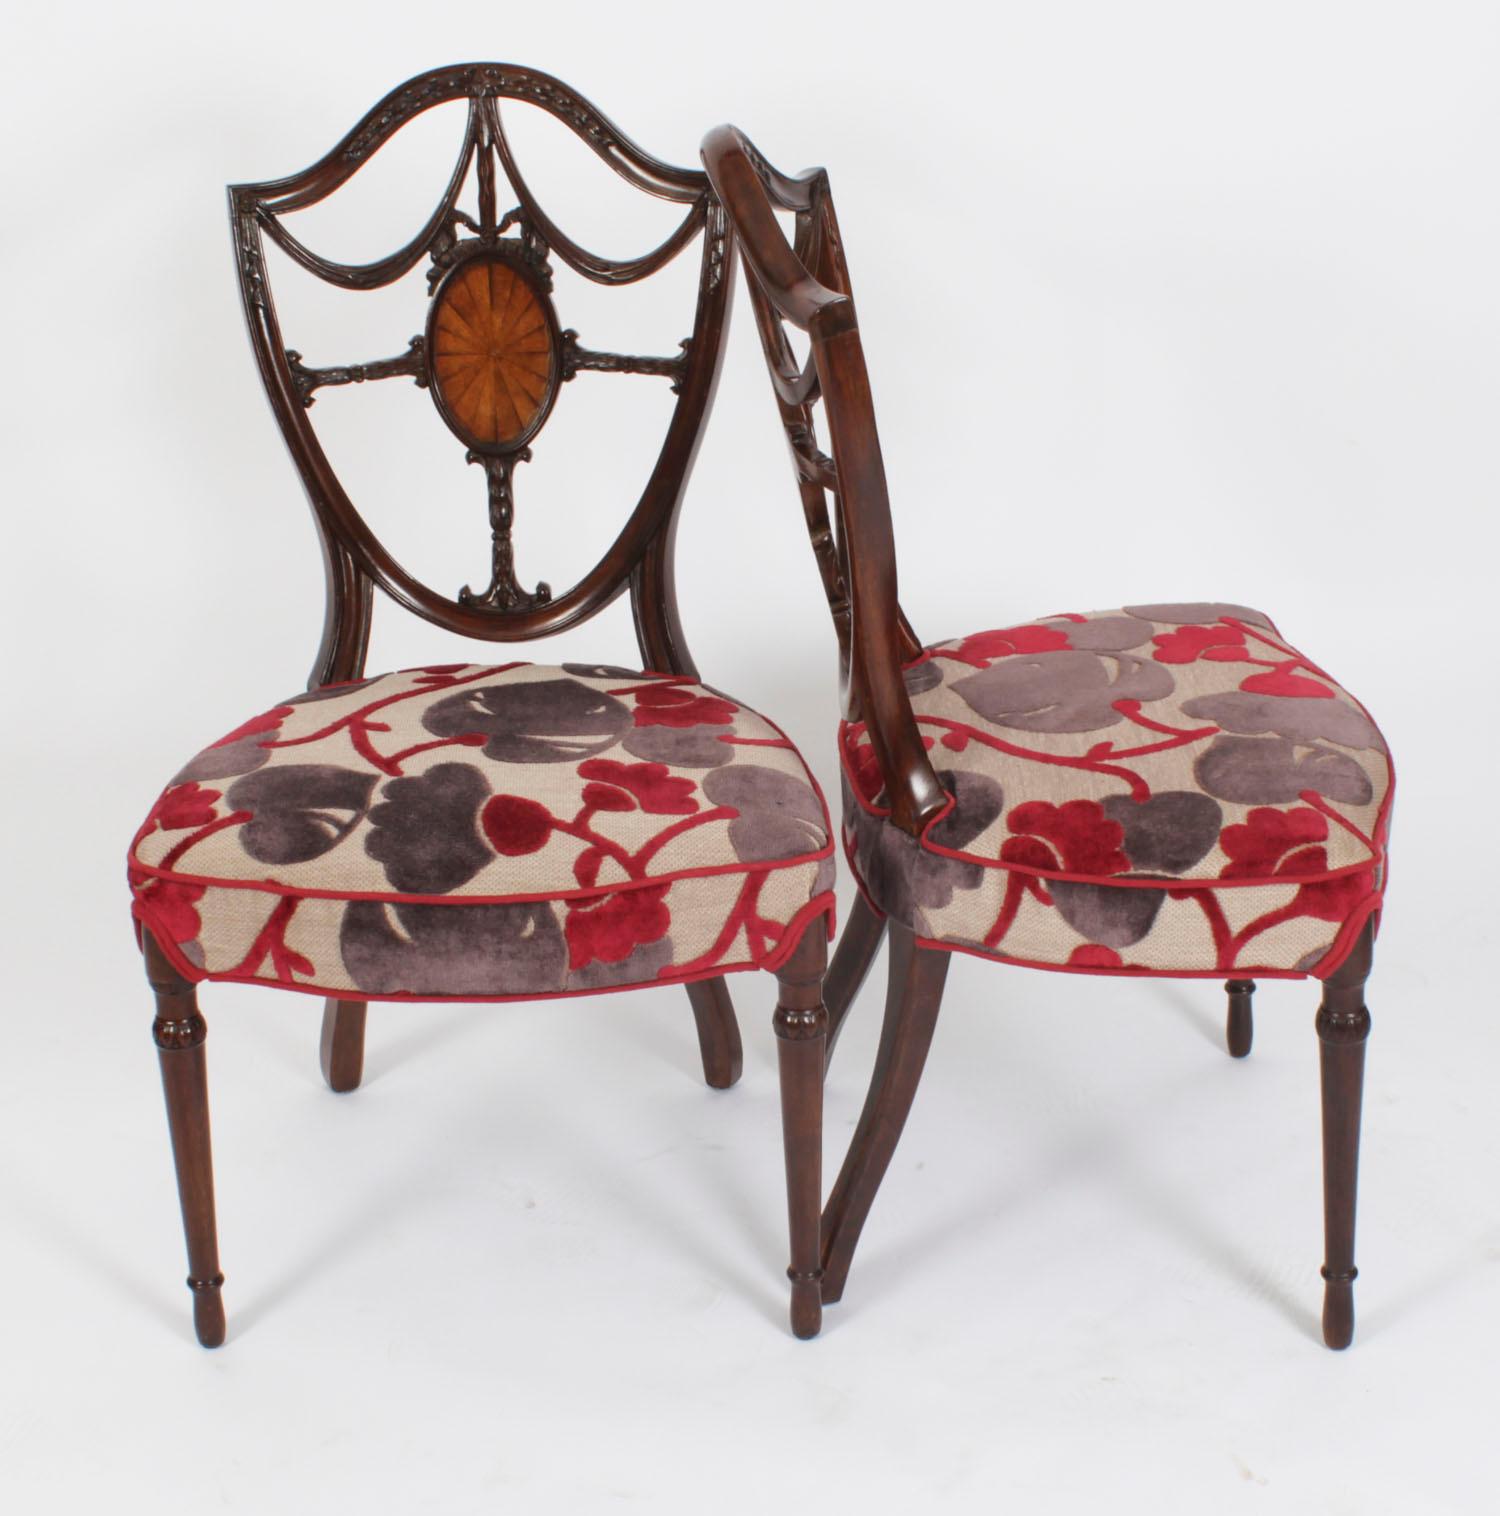 This is a fantastic antique English made set of twelve mahogany shield back dining chairs of 